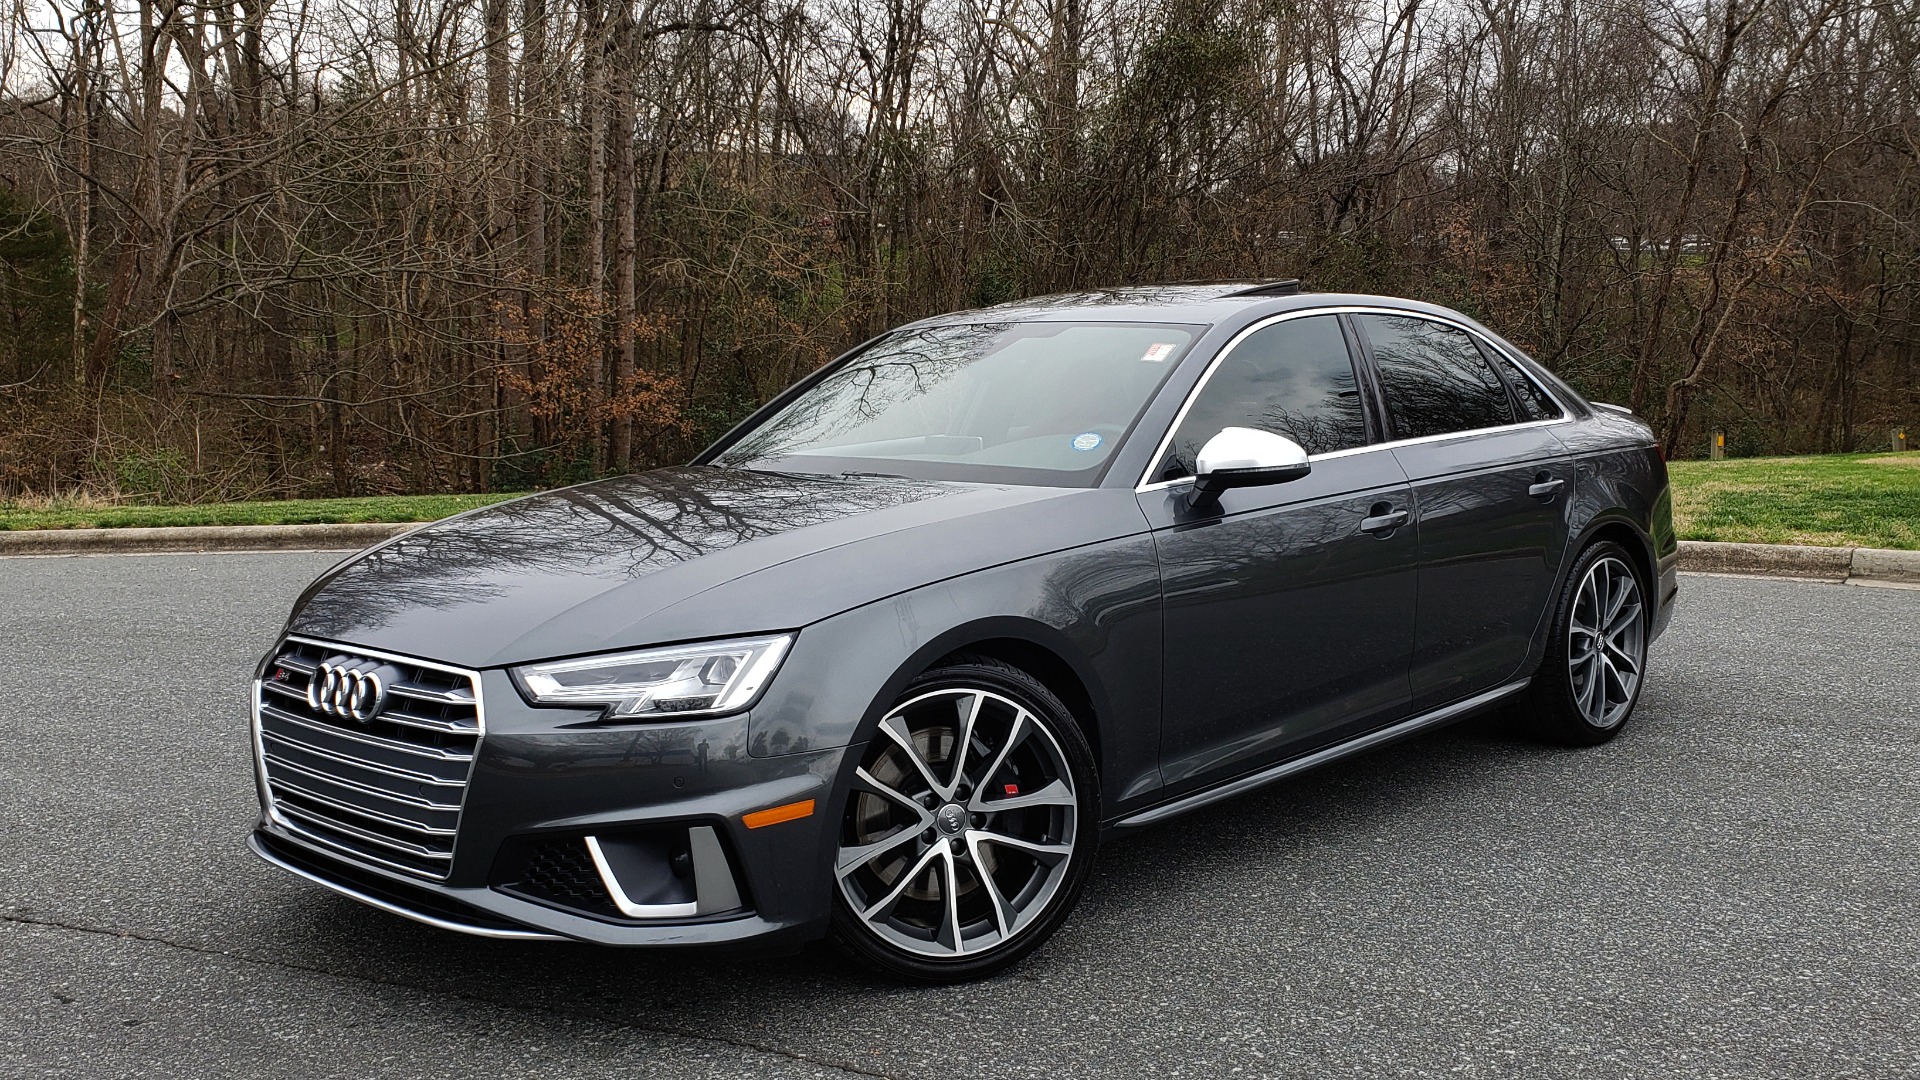 Used 2019 Audi S4 PREMIUM PLUS / AWD / NAV / SUNROOF / B&O SOUND / REARVIEW  For Sale ($43,495) | Formula Imports Stock #F10315A